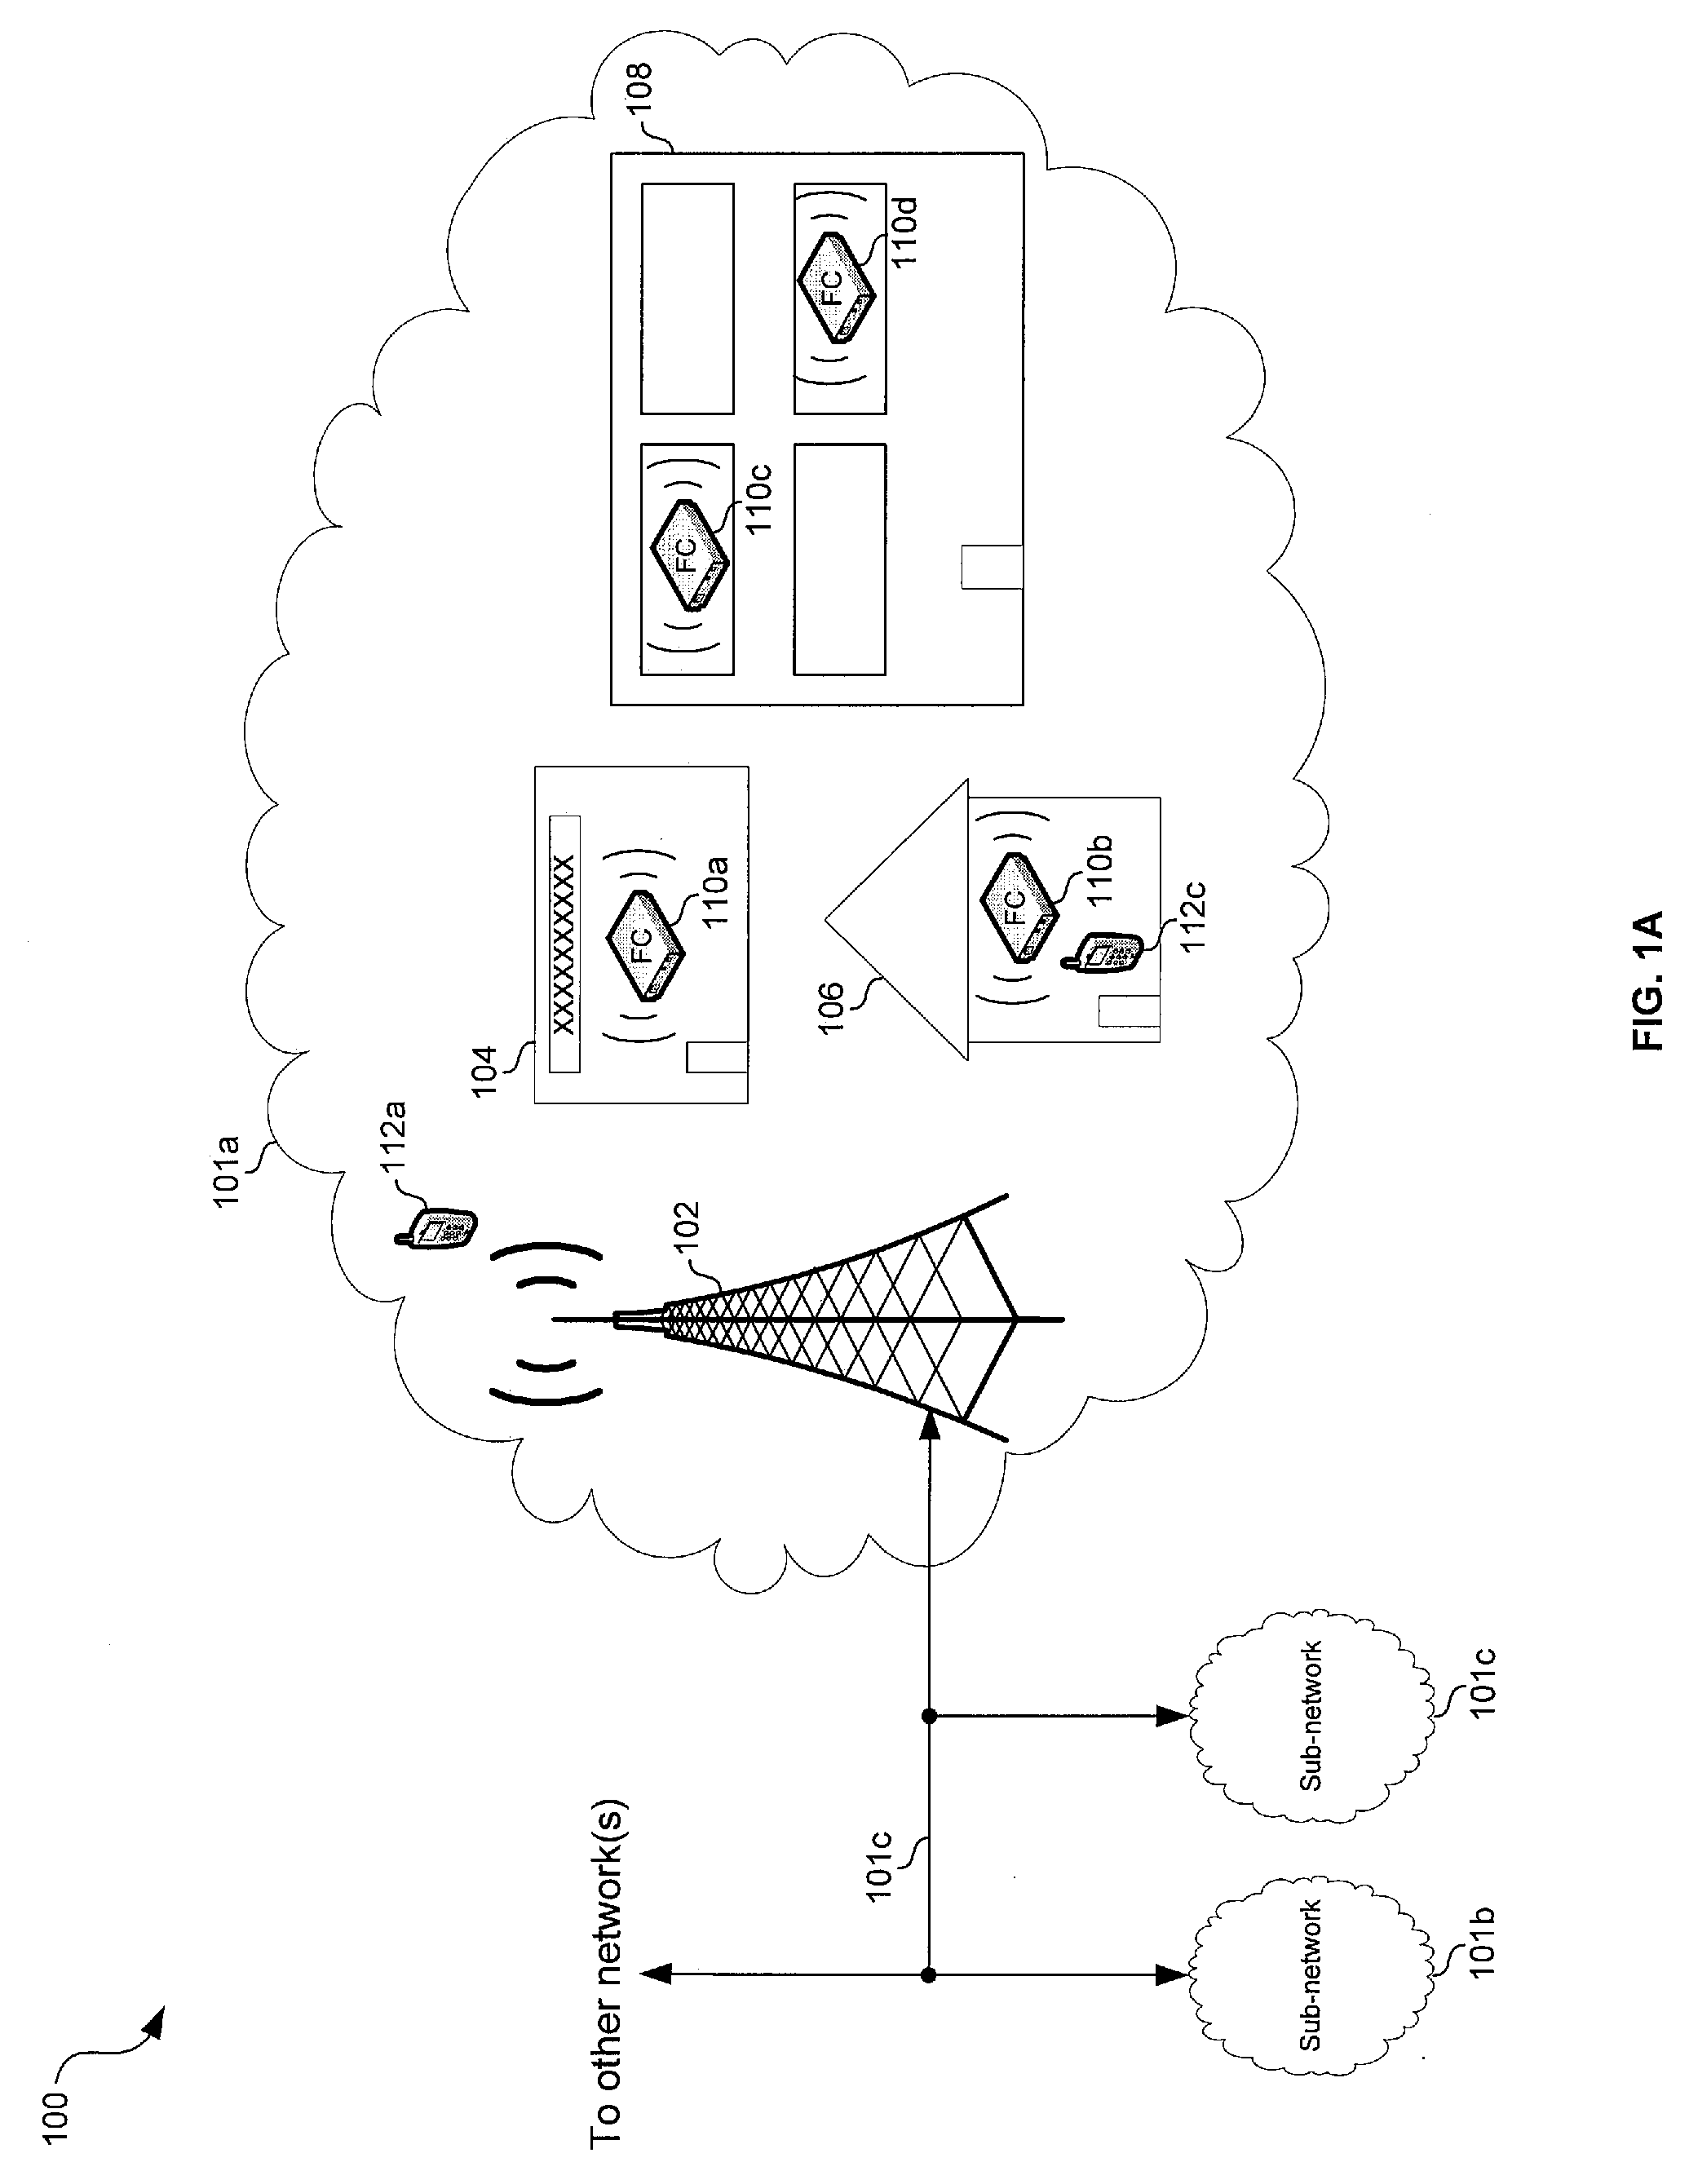 Method and system for mitigating interference among femtocells via intelligent channel selection